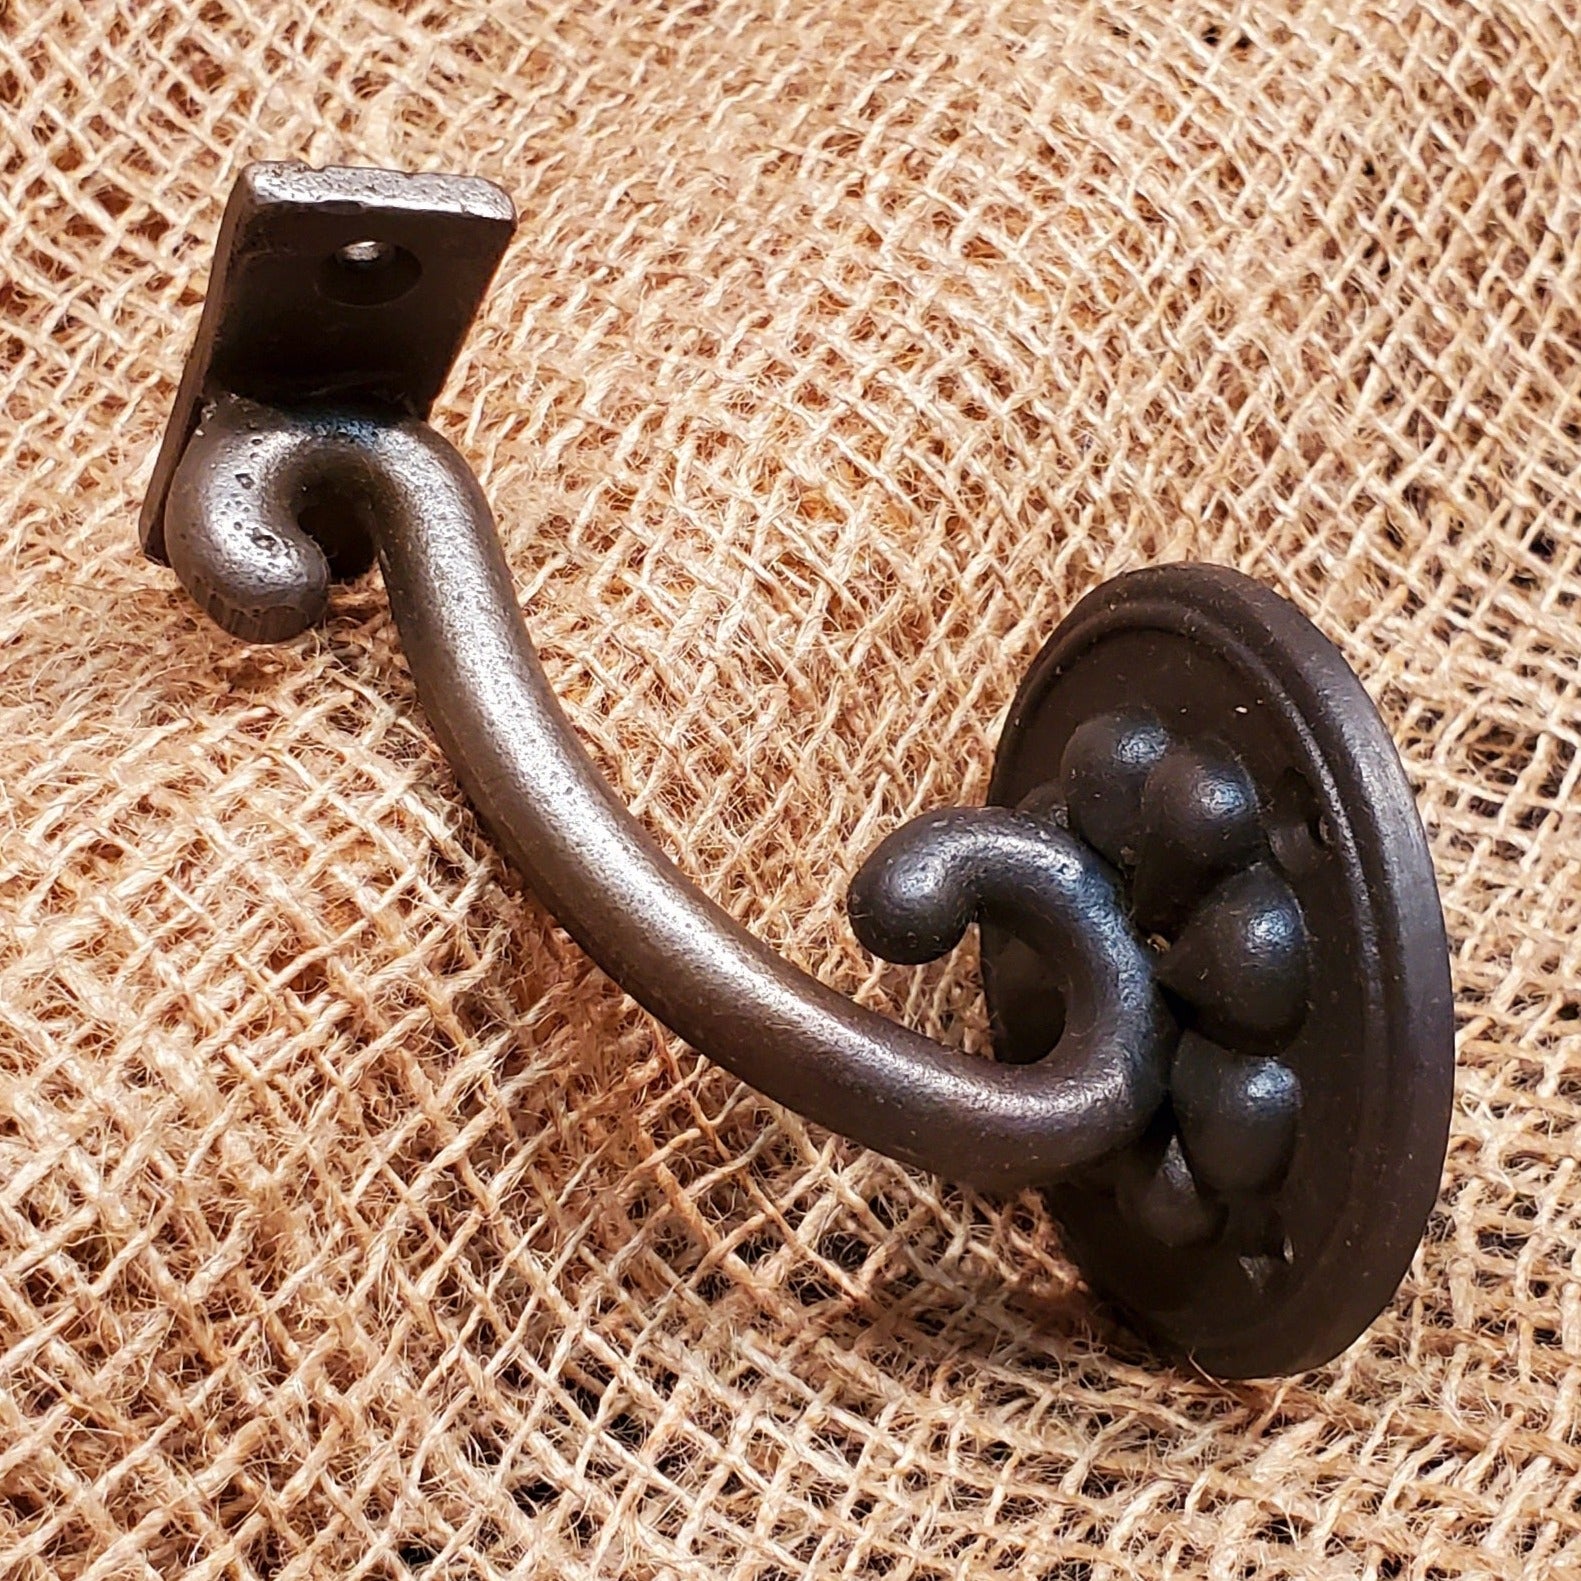 Hand Rail Bracket 3" Antique Iron Flower Design - Spearhead Collection -  - Brackets, Hardware, Home Decor, Misc. Brackets & Fittings, Supports